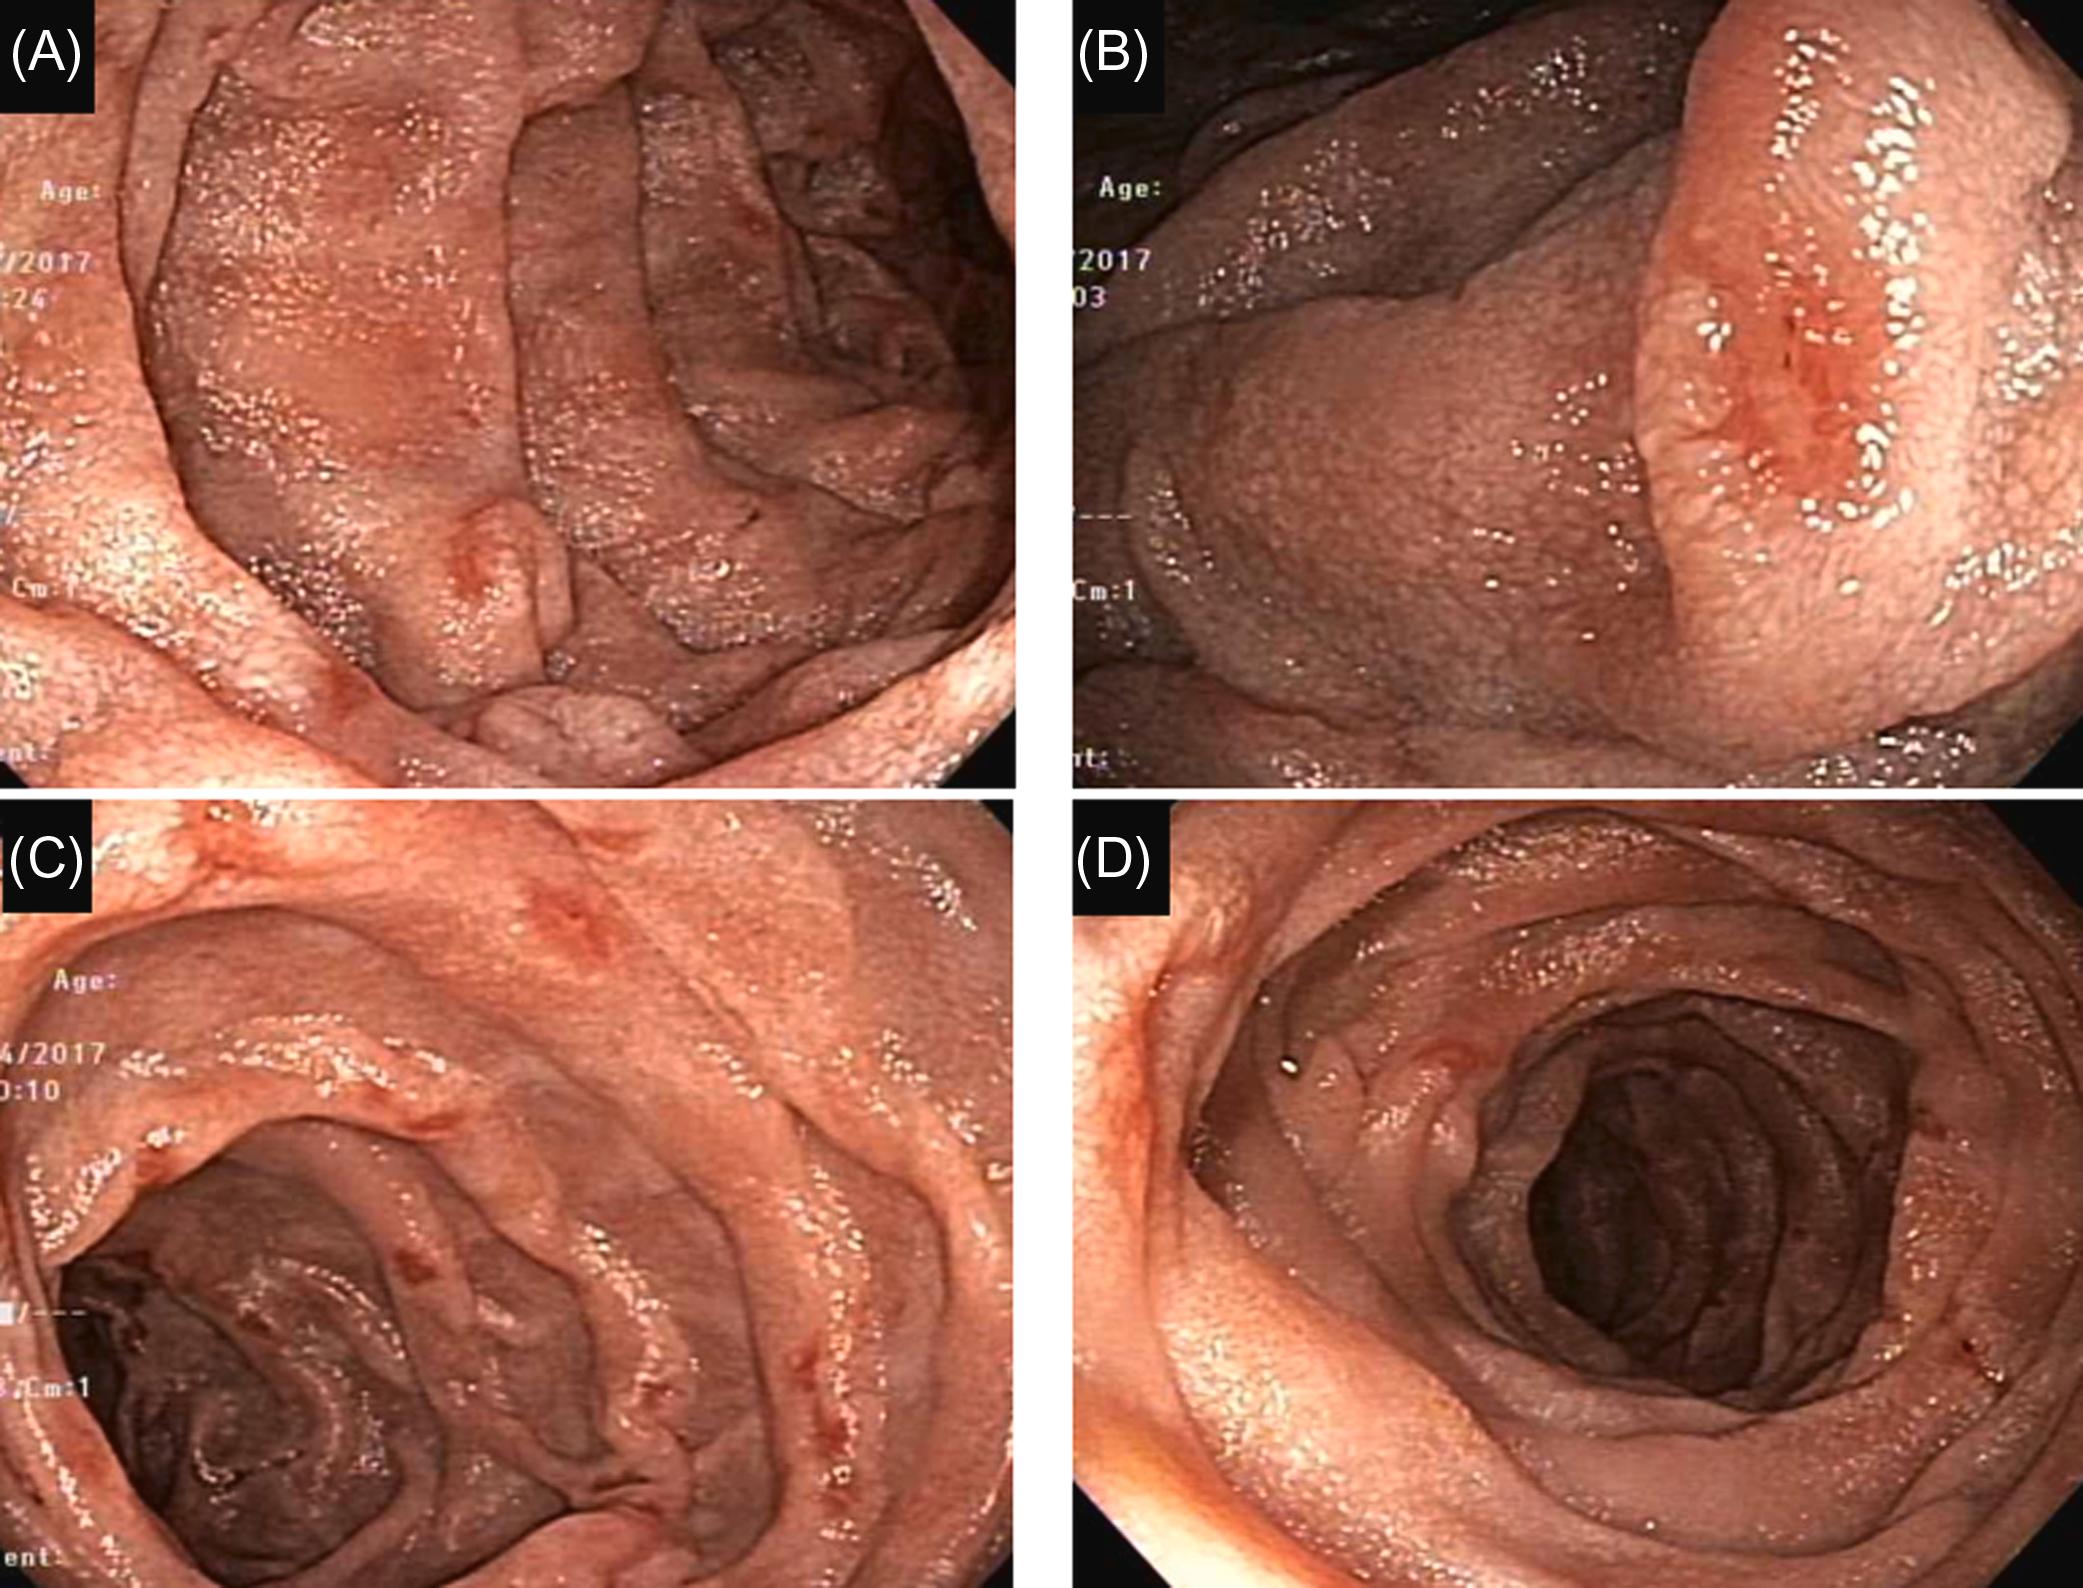 Figure 29.4, Nonsteroidal antiinflammatory drug-induced duodenitis: (A)–(D) multiple erosions and aphthous ulcers throughout the duodenum with normal intervening mucosa.